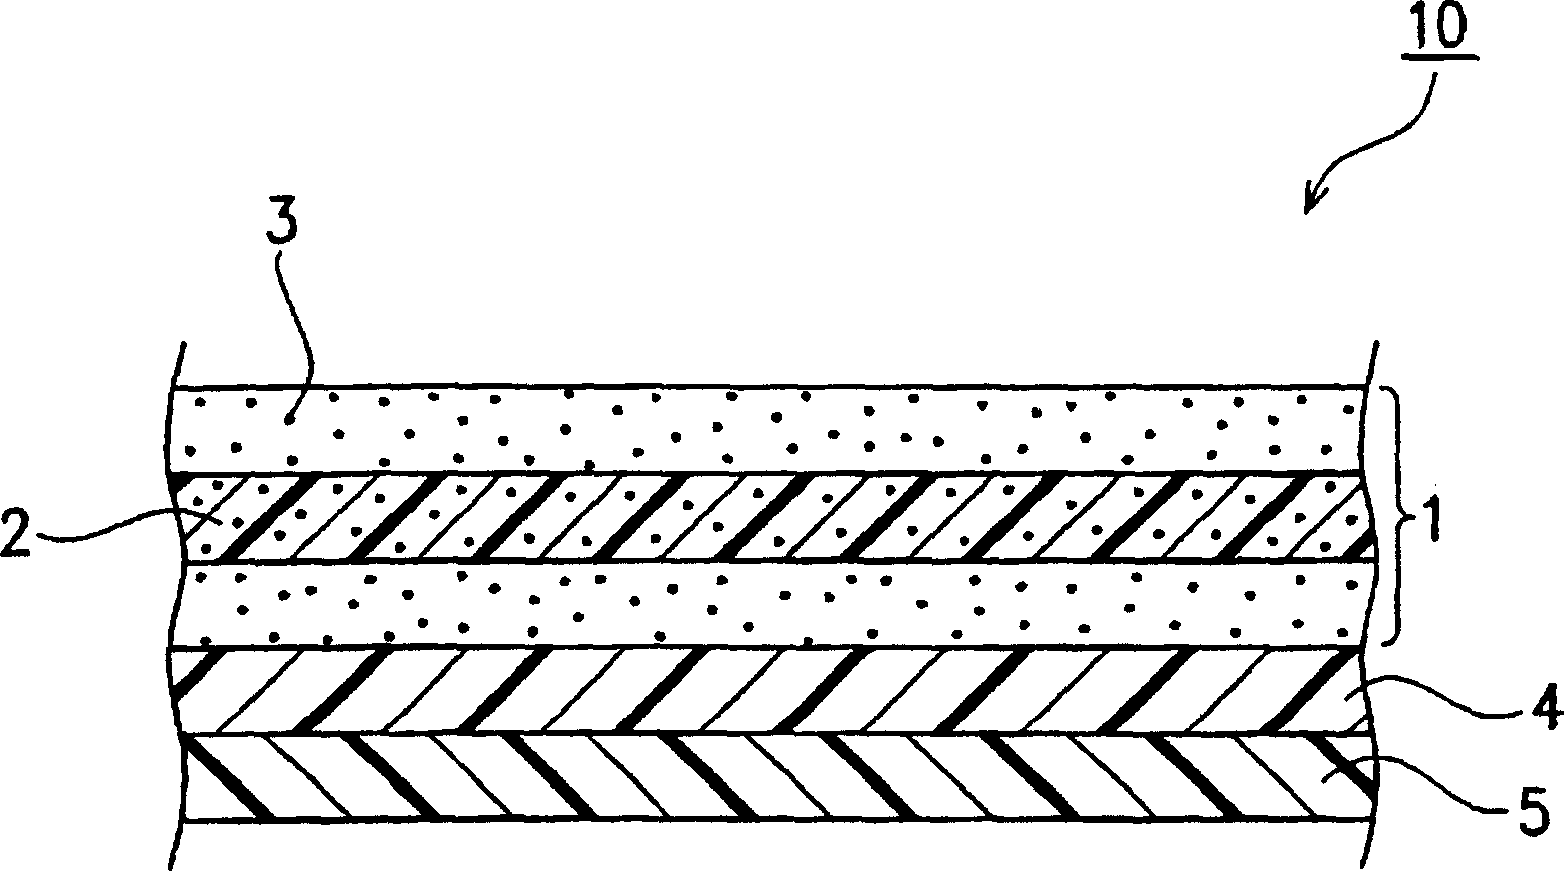 Resin sheet, liquid crystal cell substrate, liquid crystal display, substrate for electroluminescent display, electroluminescent display, and substrate for solar cell